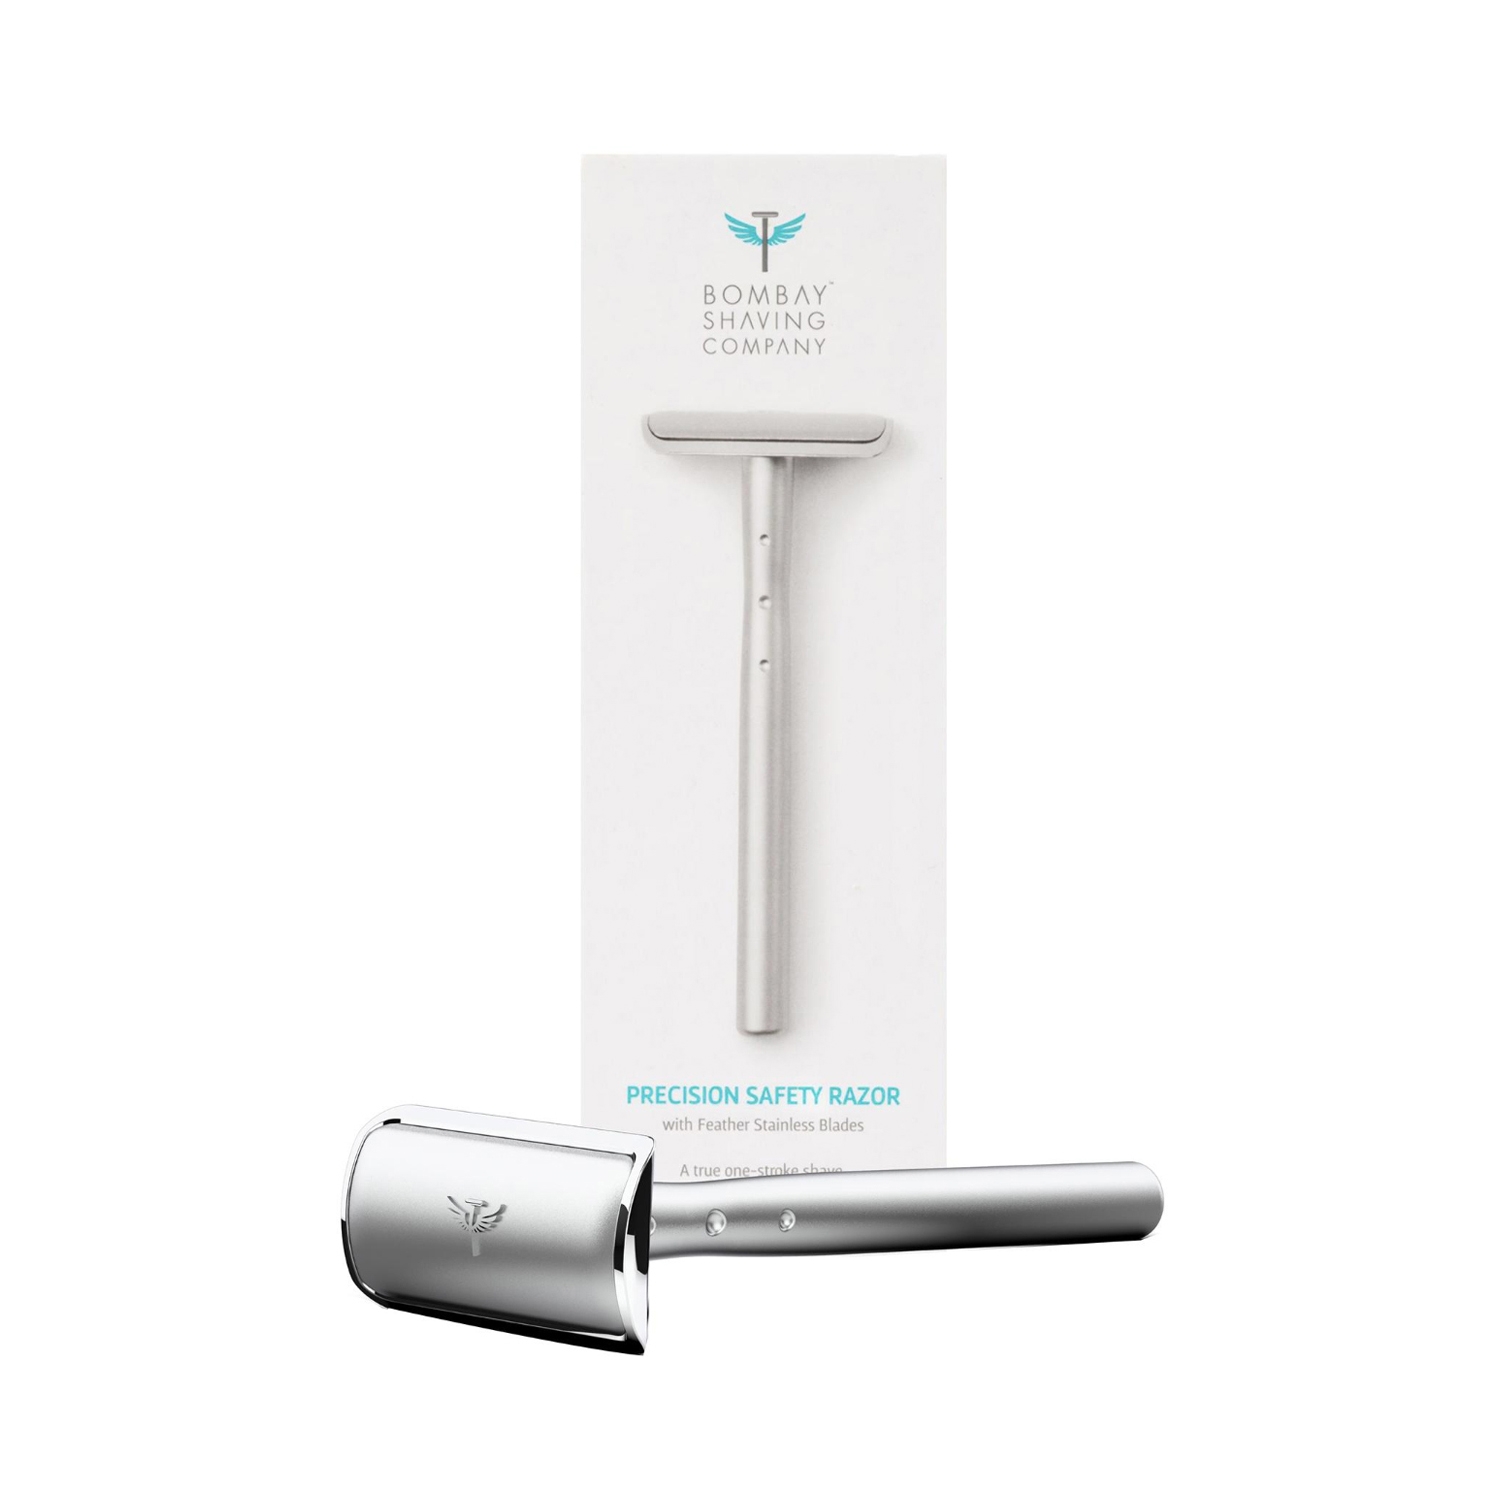 Bombay Shaving Company | Bombay Shaving Company Precision Safety Razor with Feather Stainless Blades